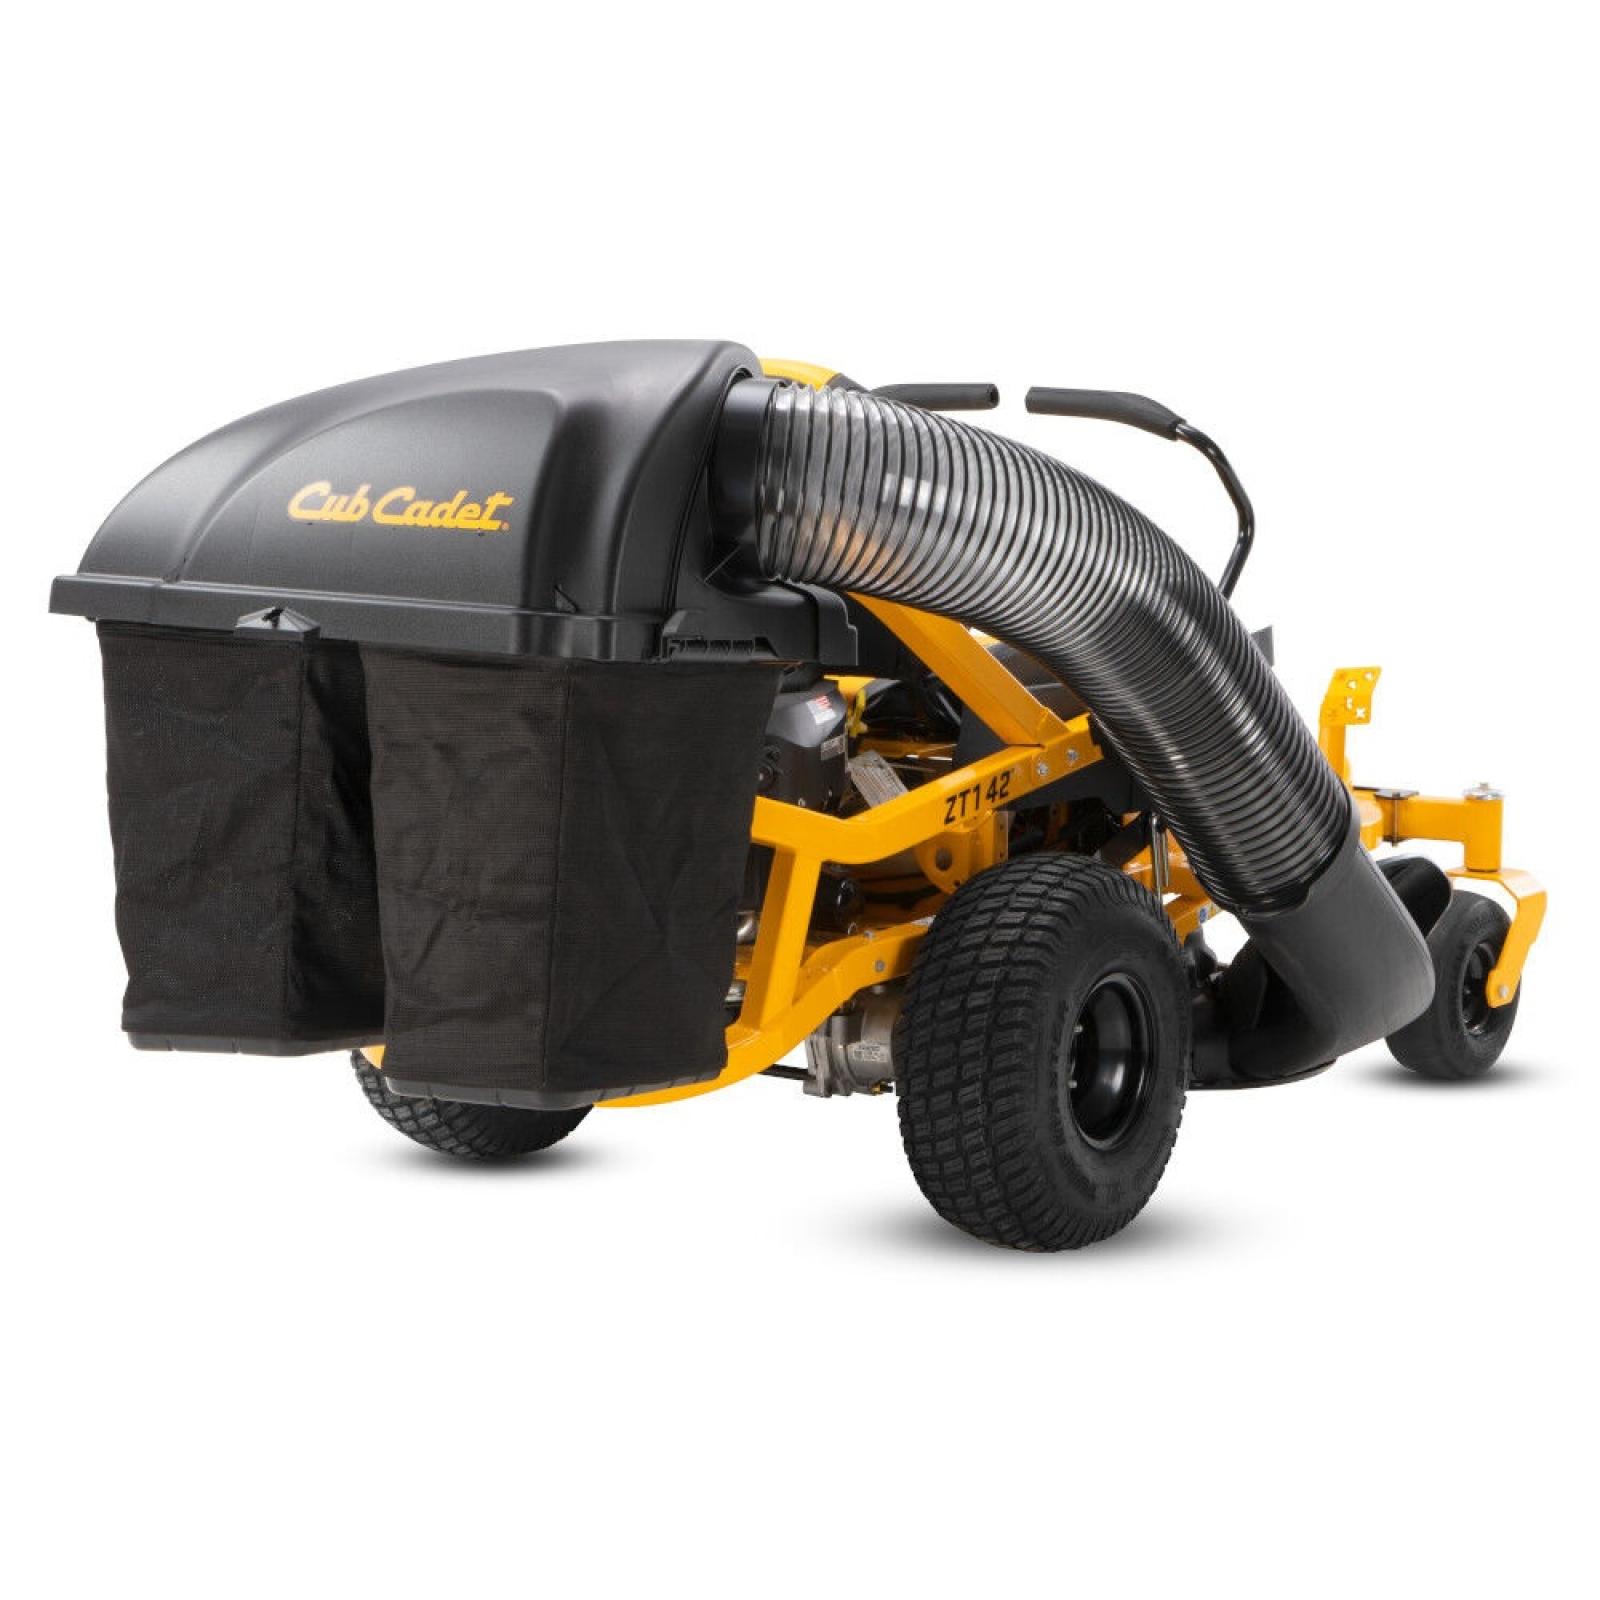 Cub Cadet Double Bagger for Zero-Turn Mowers 42" and 46" Decks